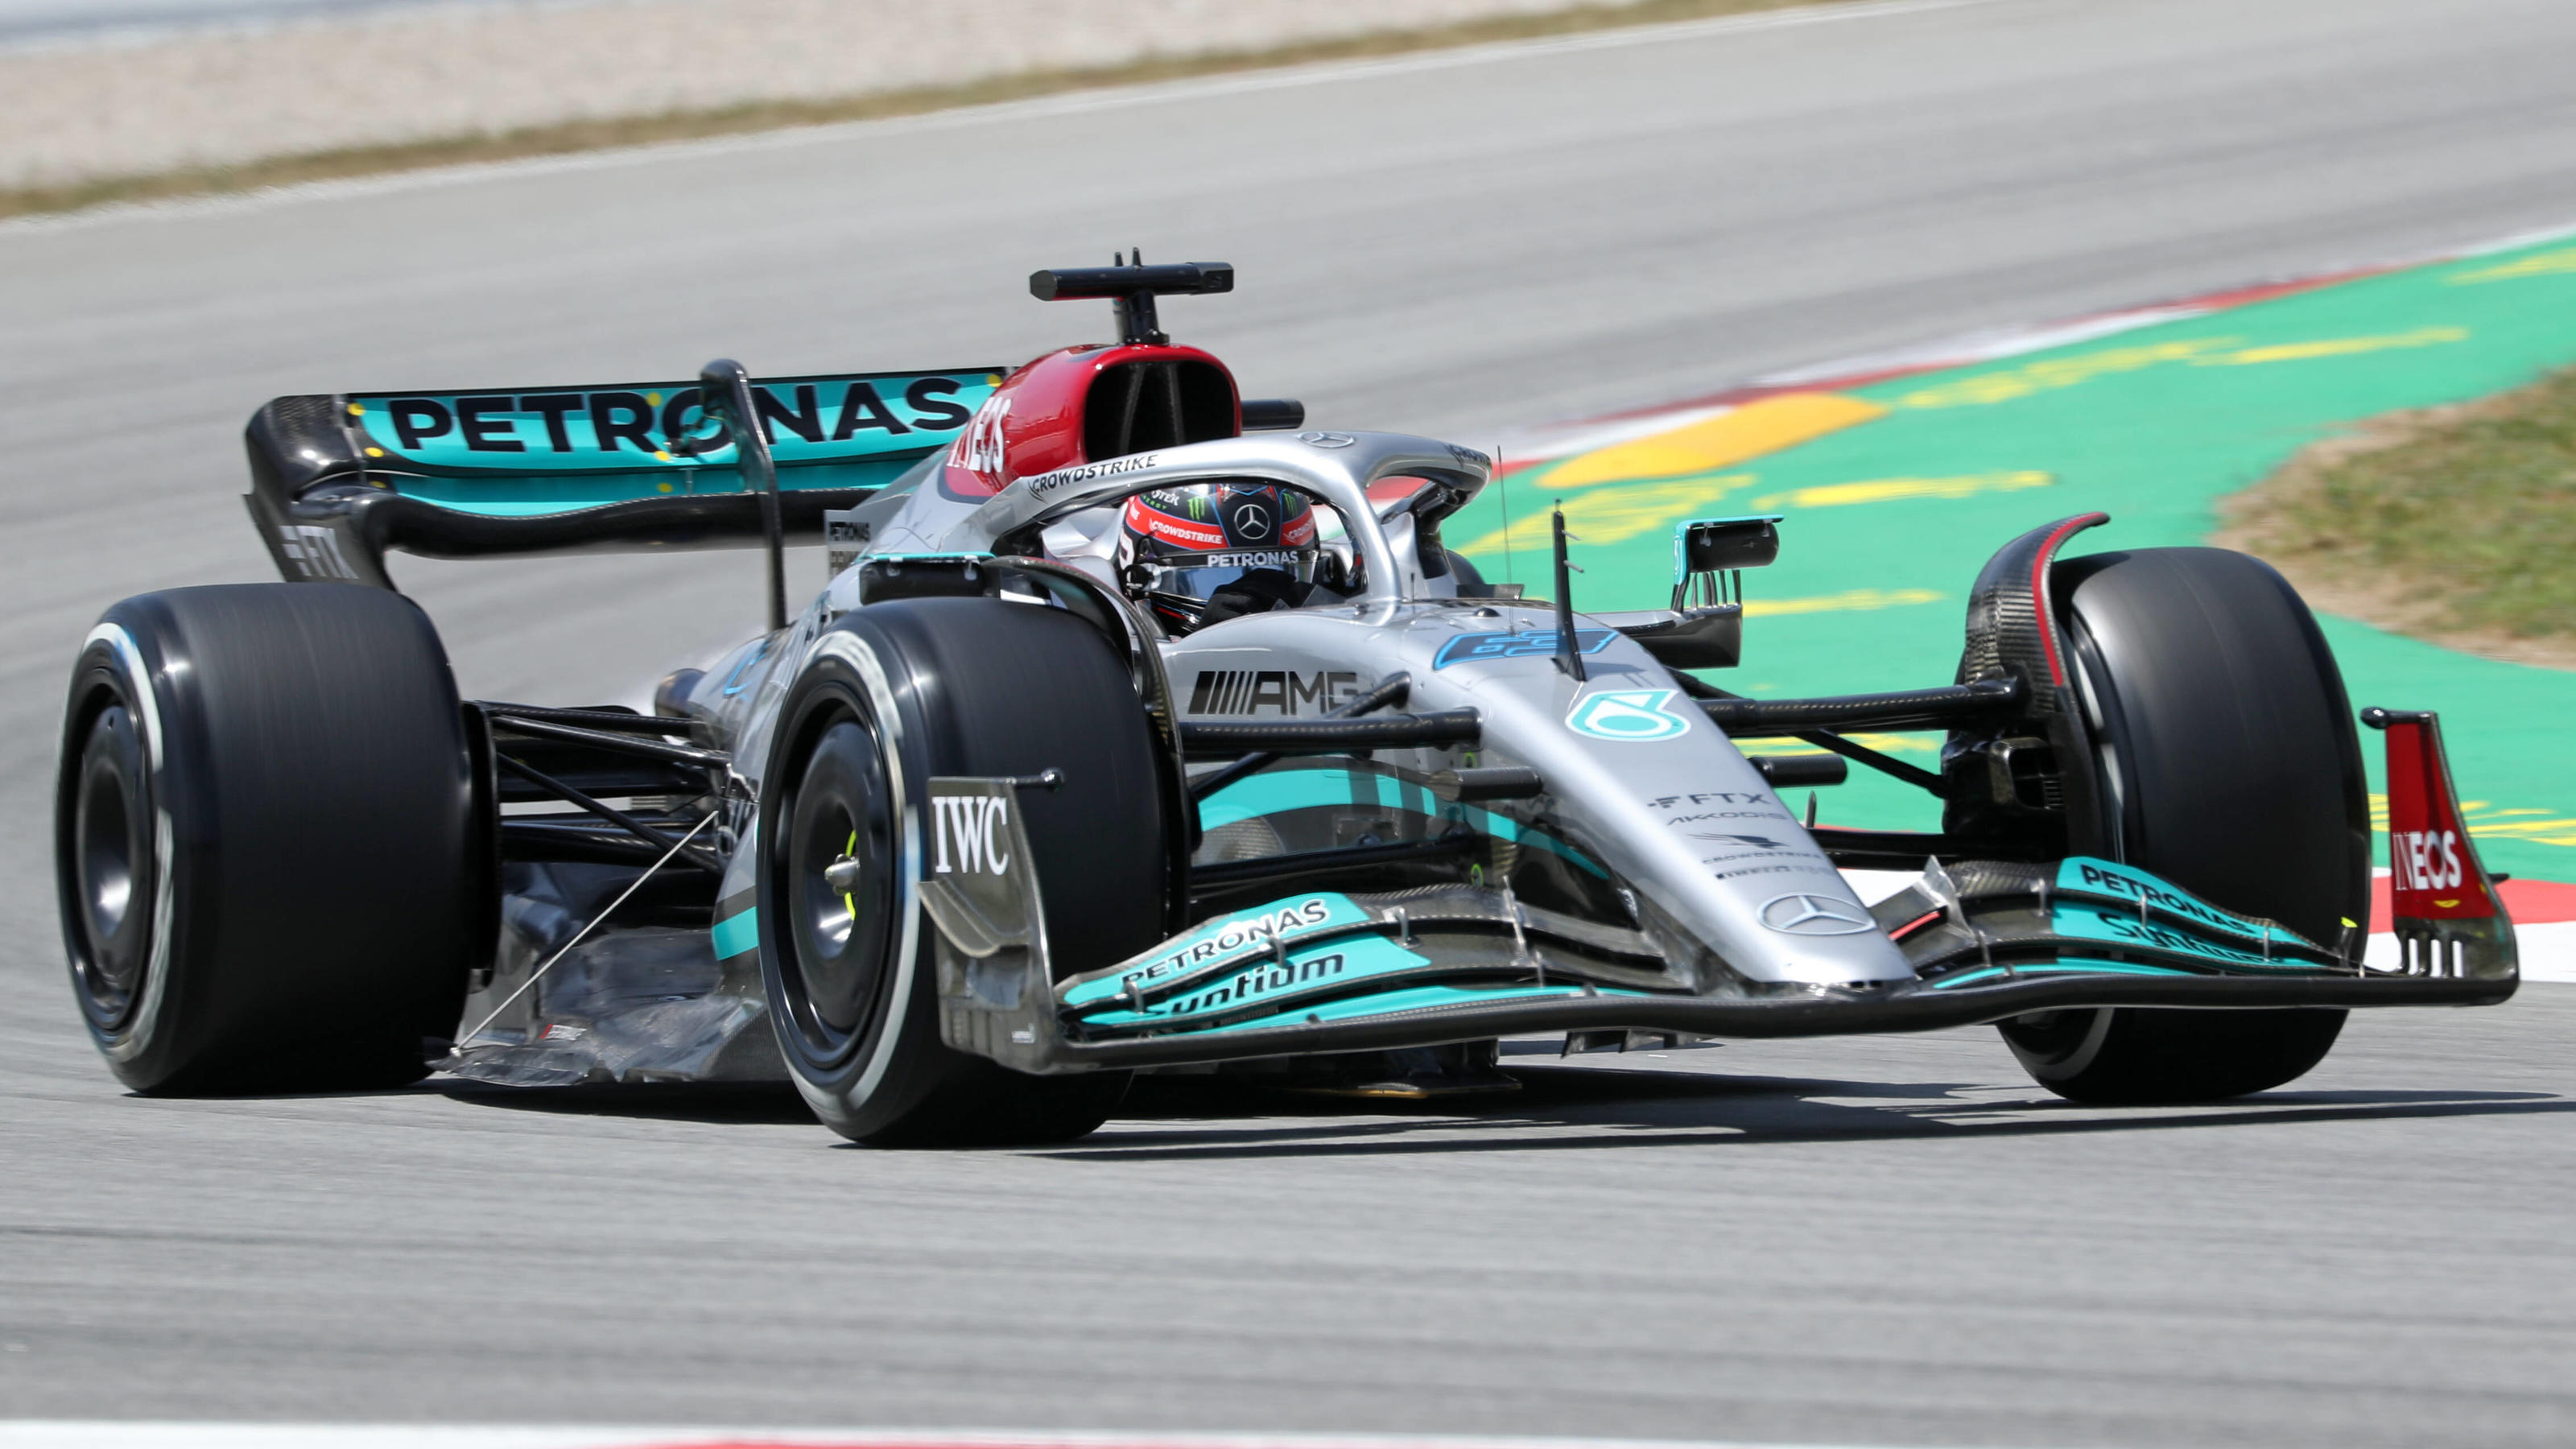  F1 Grand Prix of Spain George Russell s Mercedes during practice 1 of the Formula 1 Pirelli GP of Spain, held at the Circuit de Barcelona Catalunya, in Barcelona, on 20th May 2022. -- Barcelona Barcelona Spain PUBLICATIONxNOTxINxFRA Copyright: xUrba